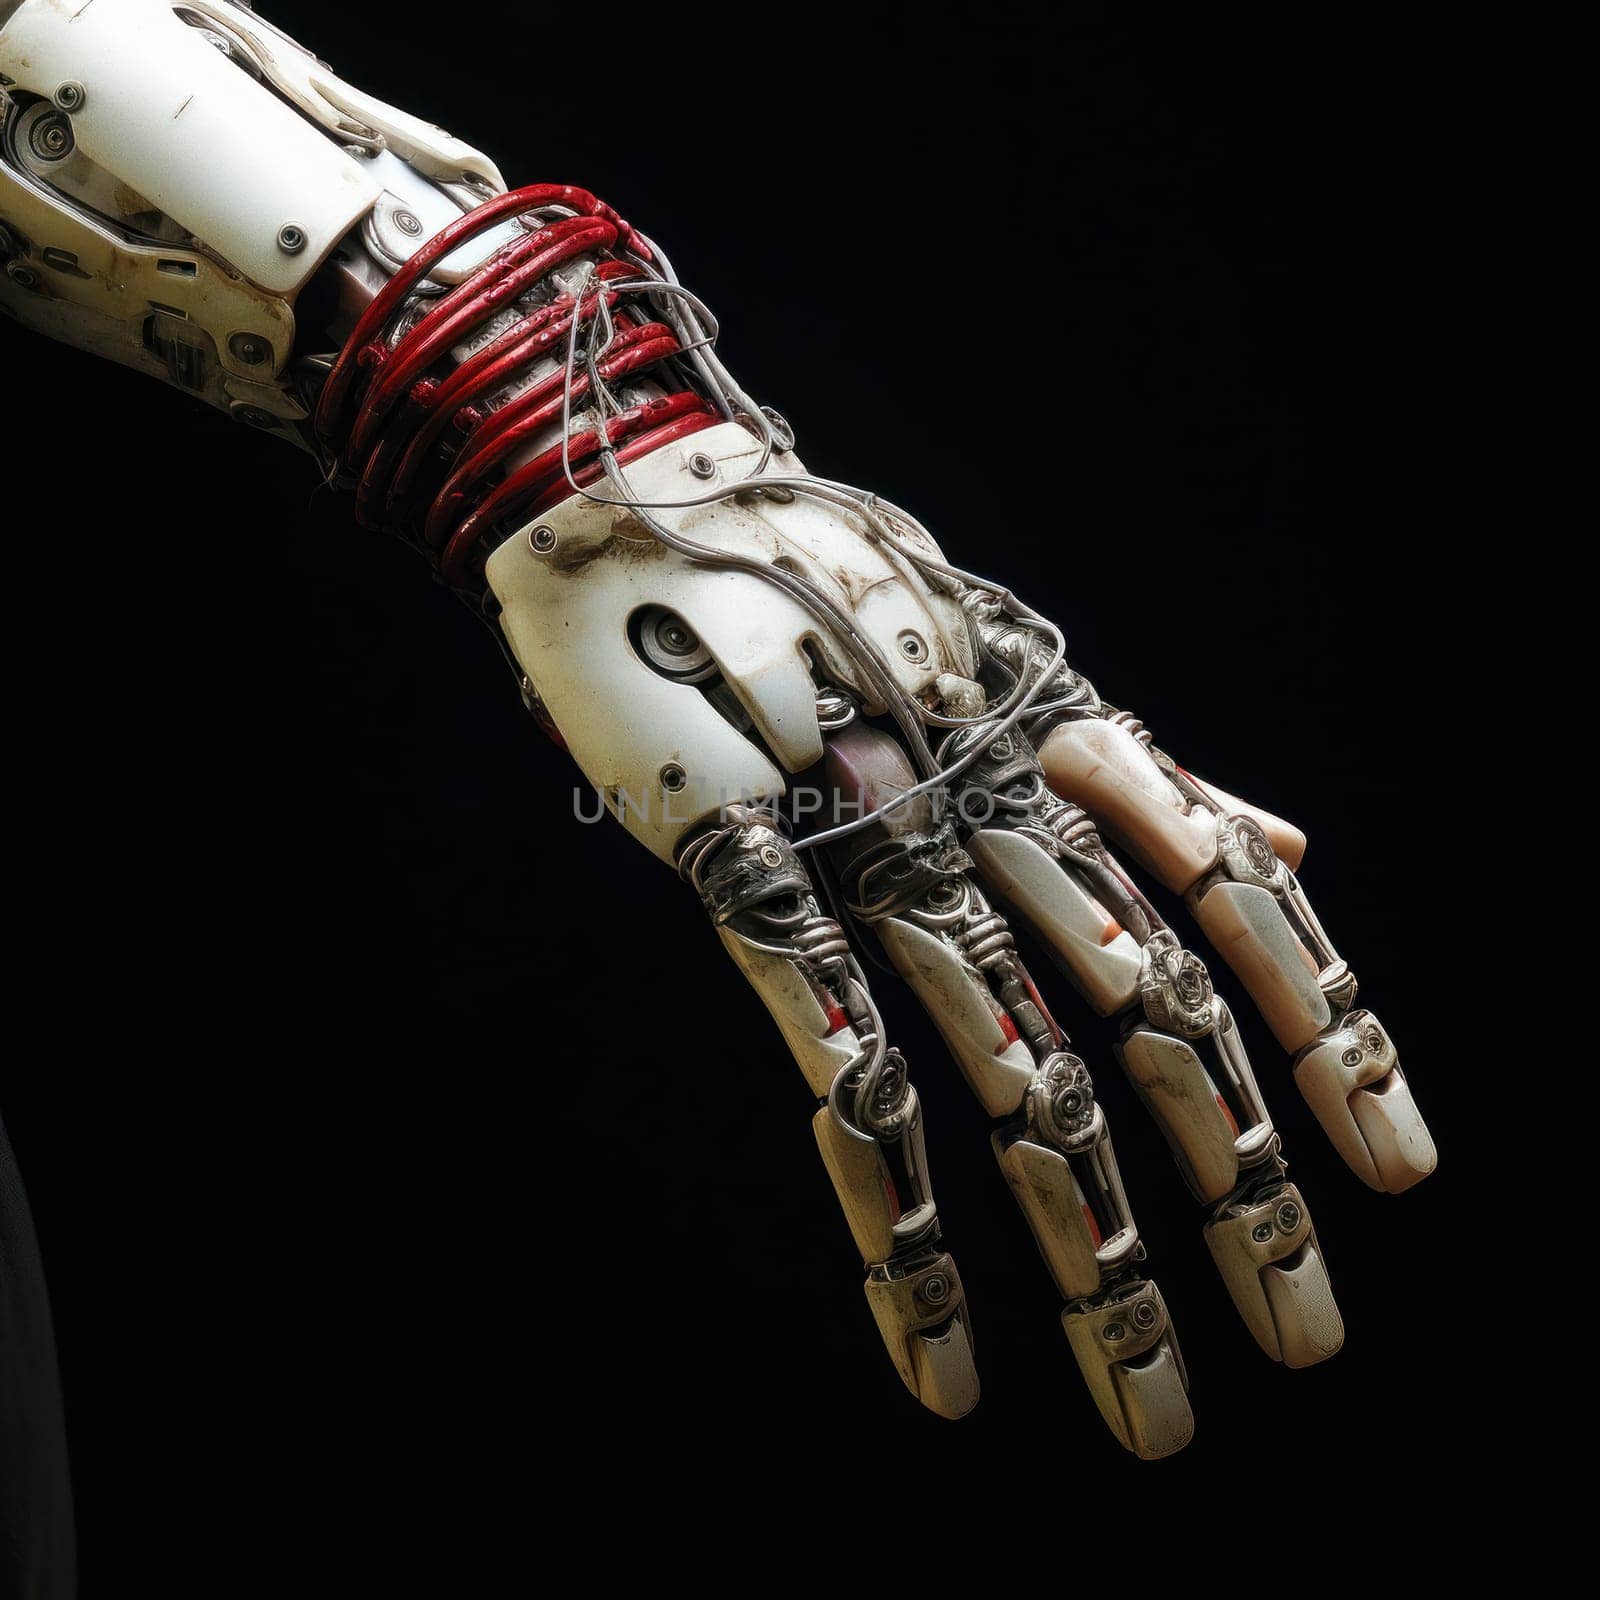 Futuristic close-up of cybernetic robot hand embodying cutting-edge innovation and automation.